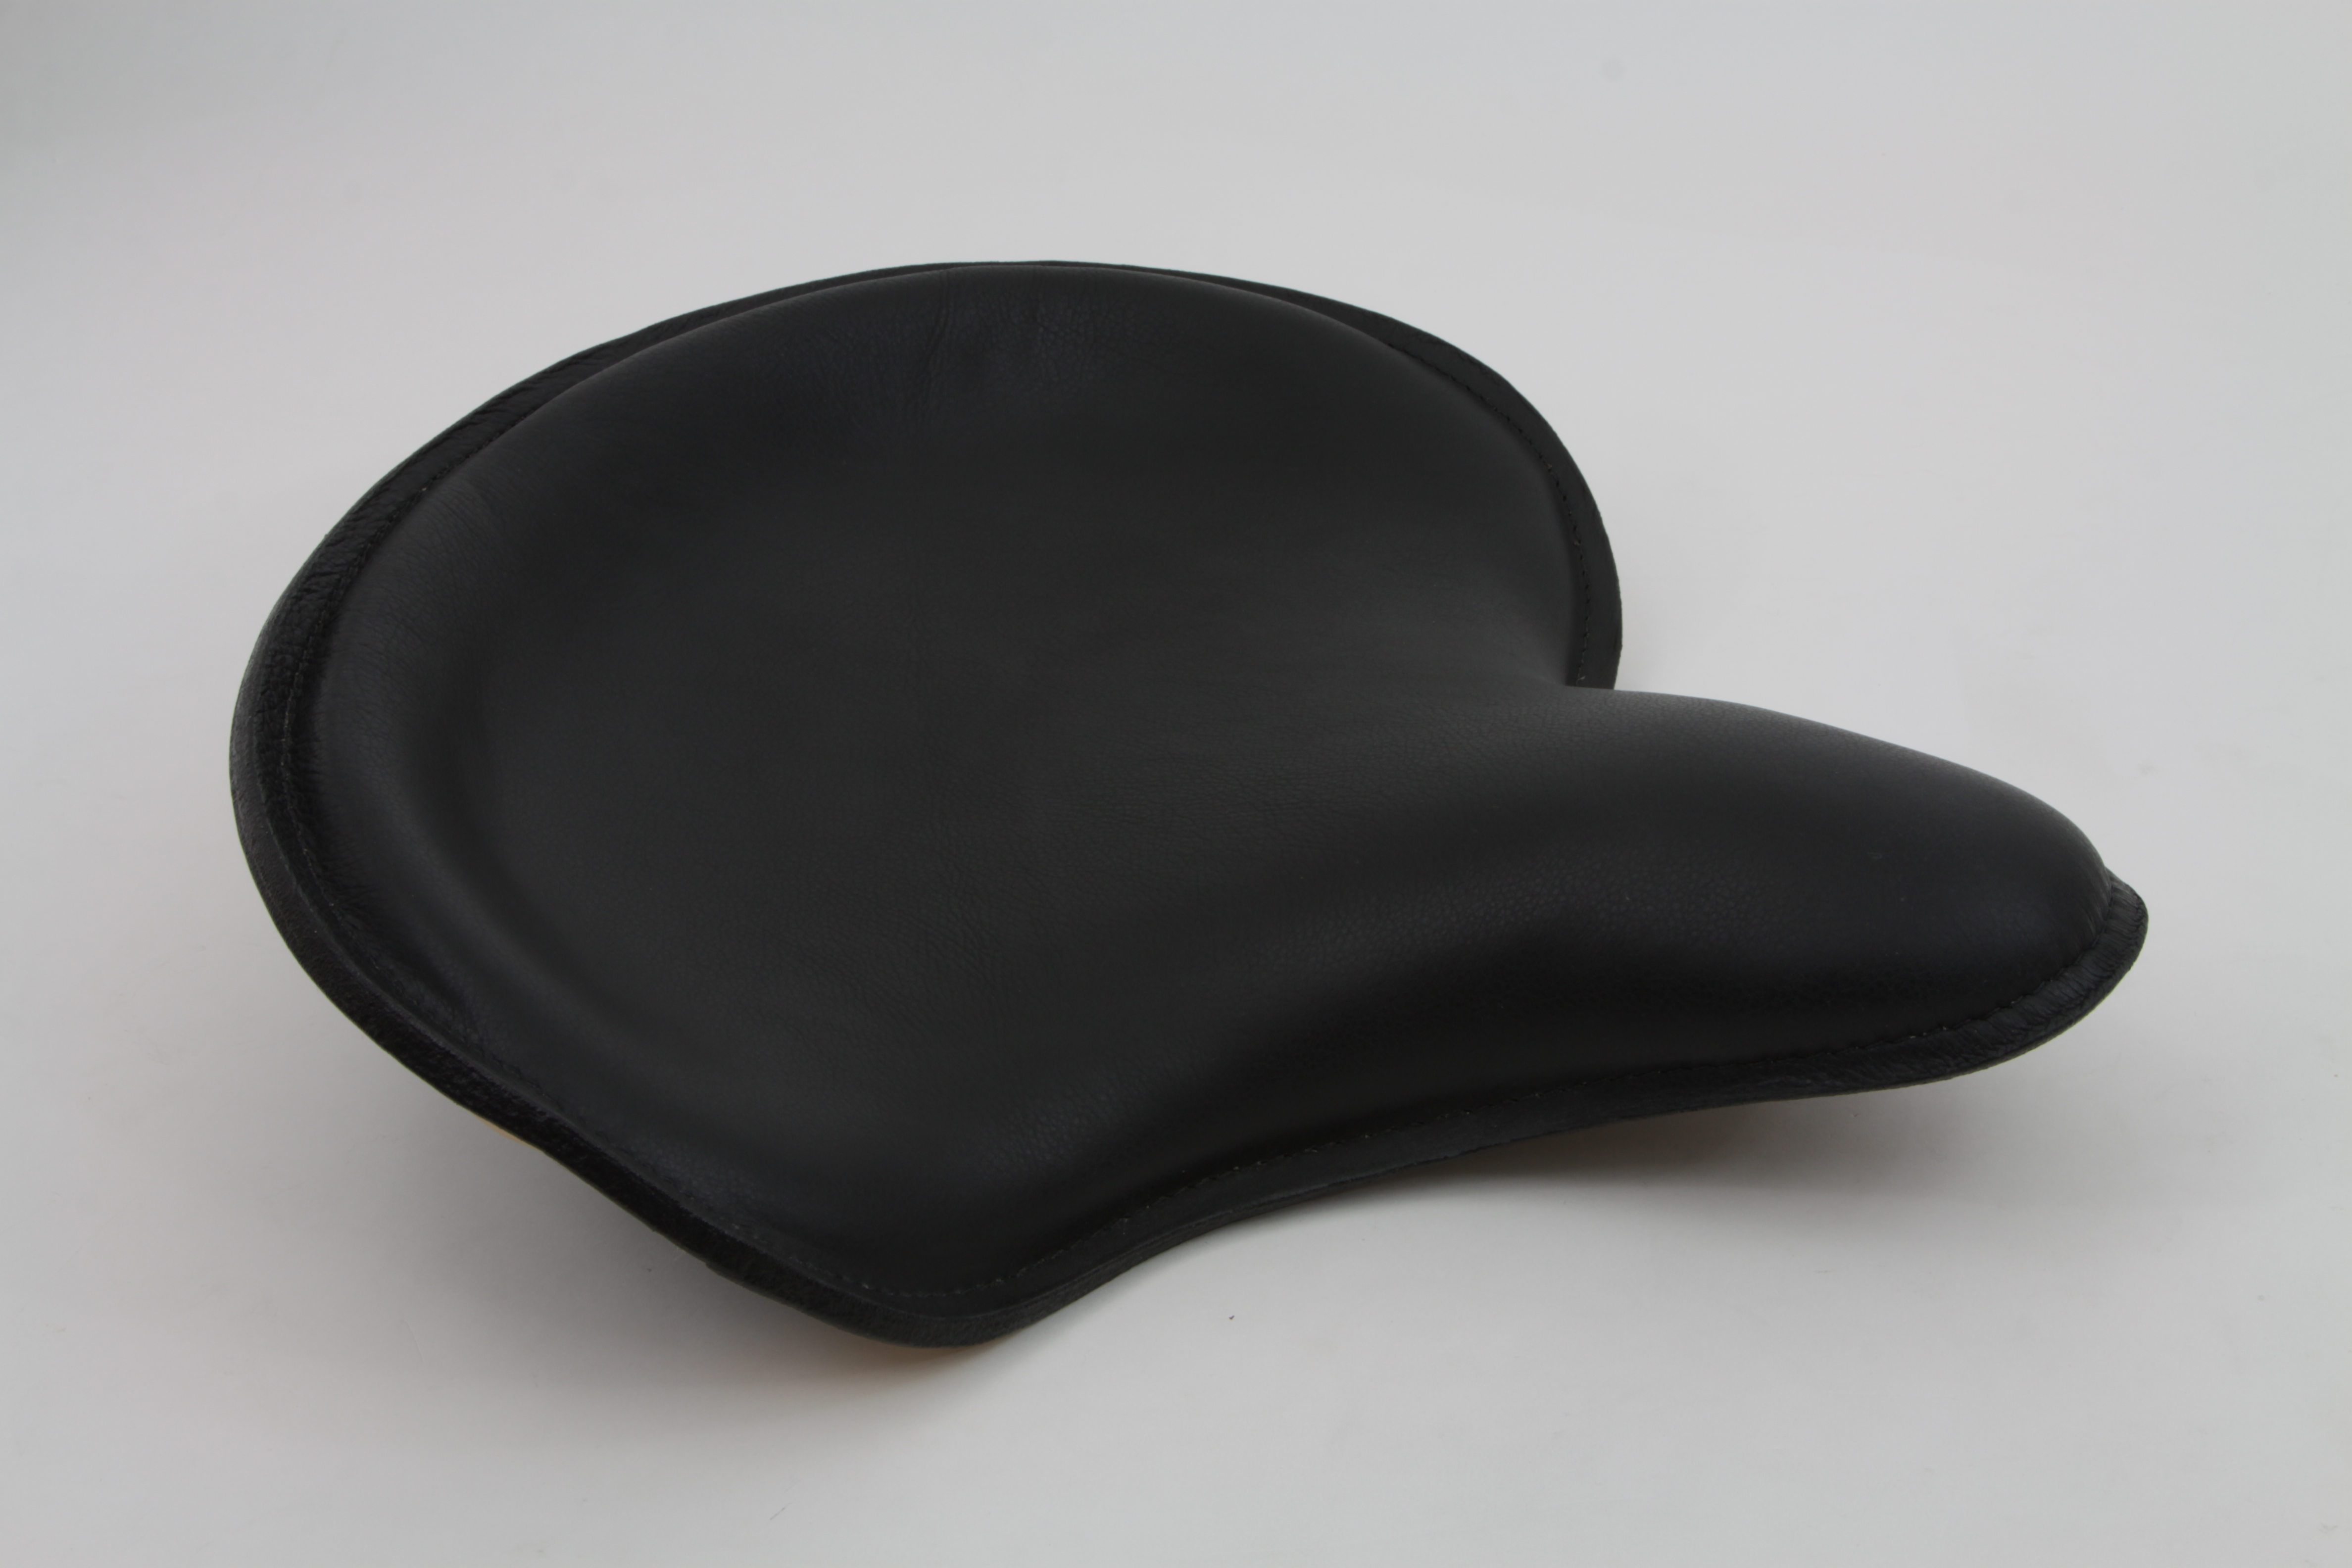 Black Solo Seat with Distressed Black Finish - Click Image to Close